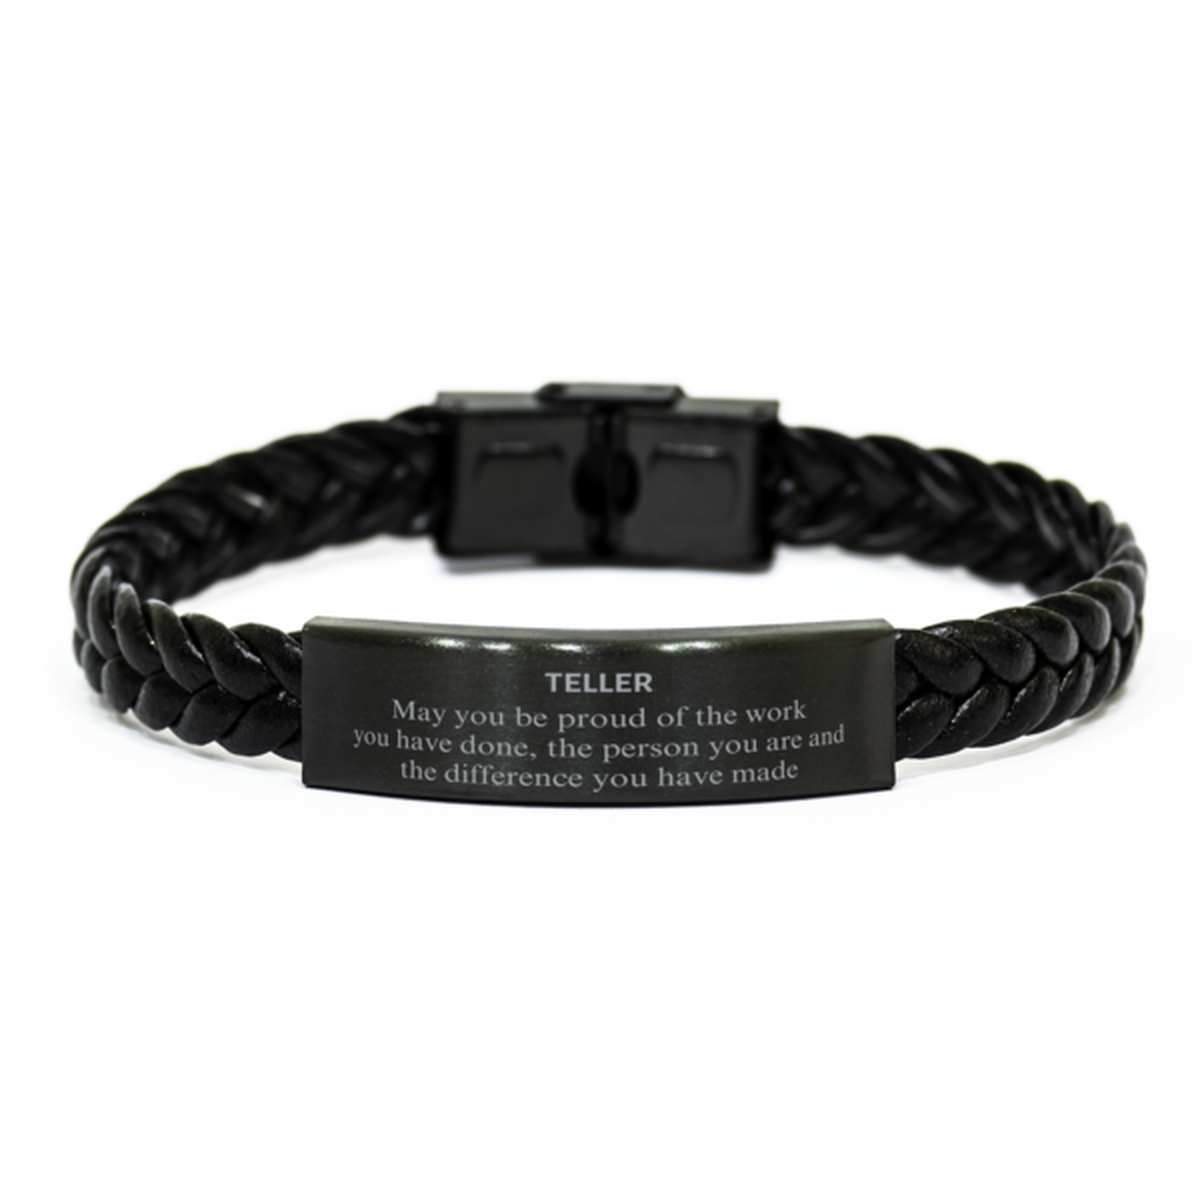 Teller May you be proud of the work you have done, Retirement Teller Braided Leather Bracelet for Colleague Appreciation Gifts Amazing for Teller